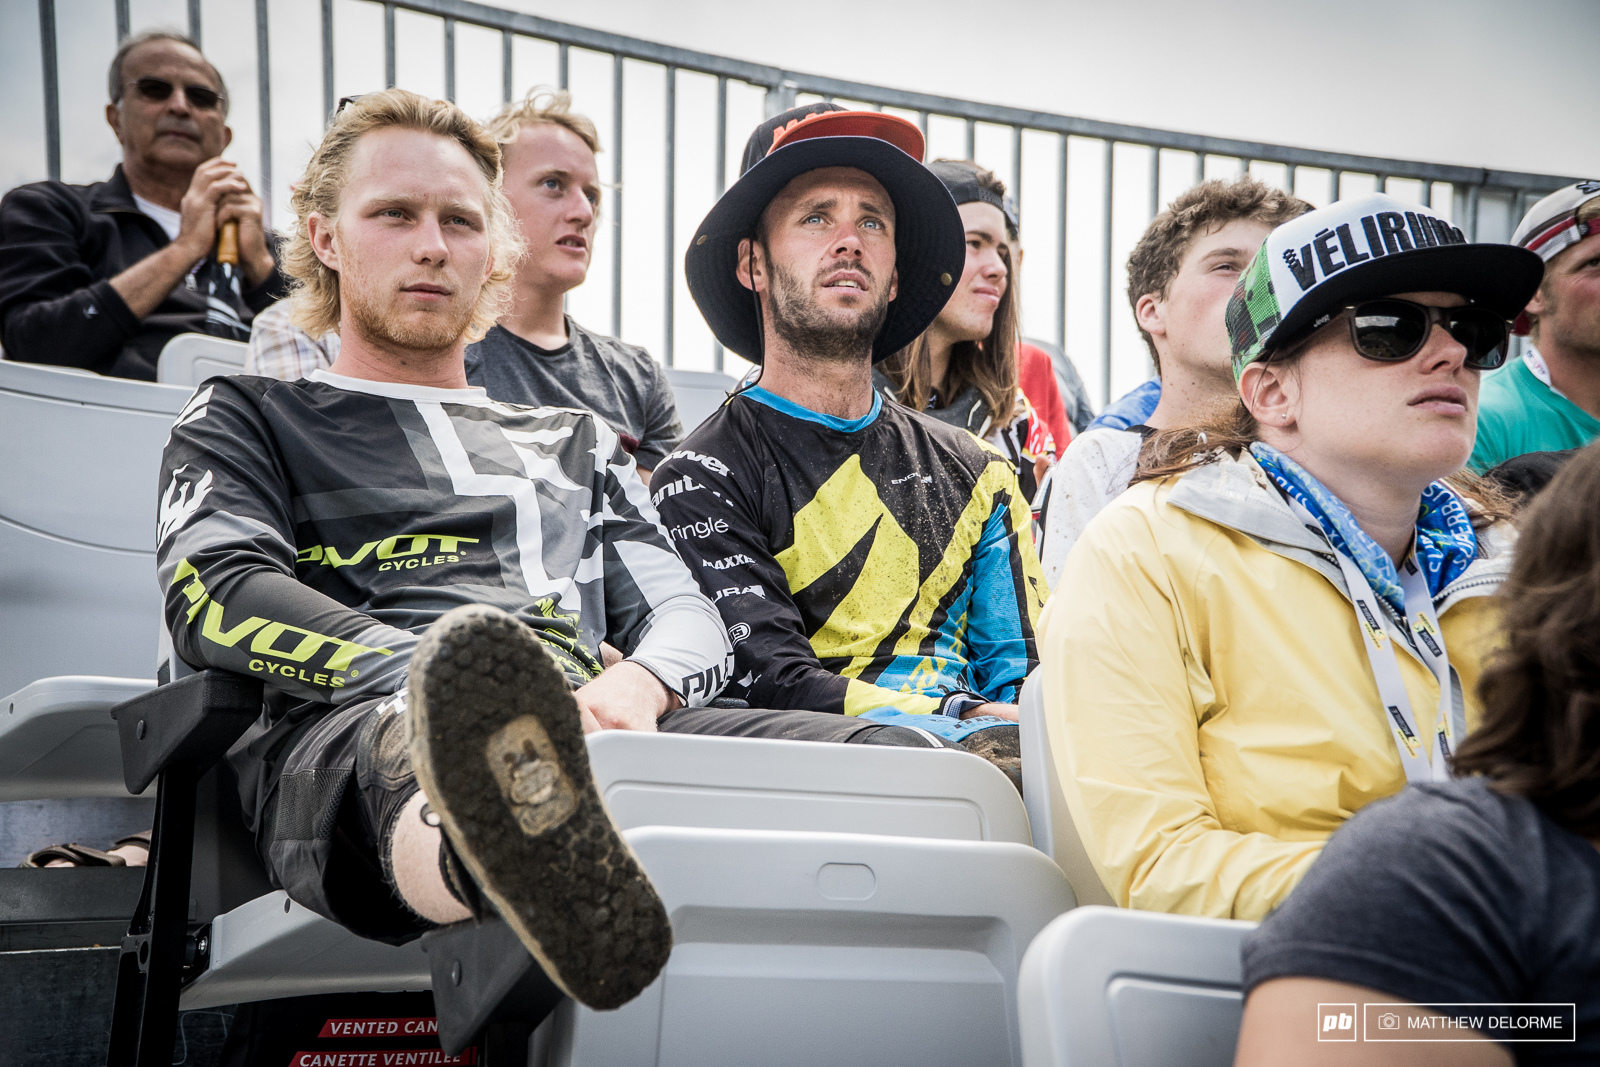 Eddie Masters and Bernard Kerr took some time to watch the Women from the grand stands.